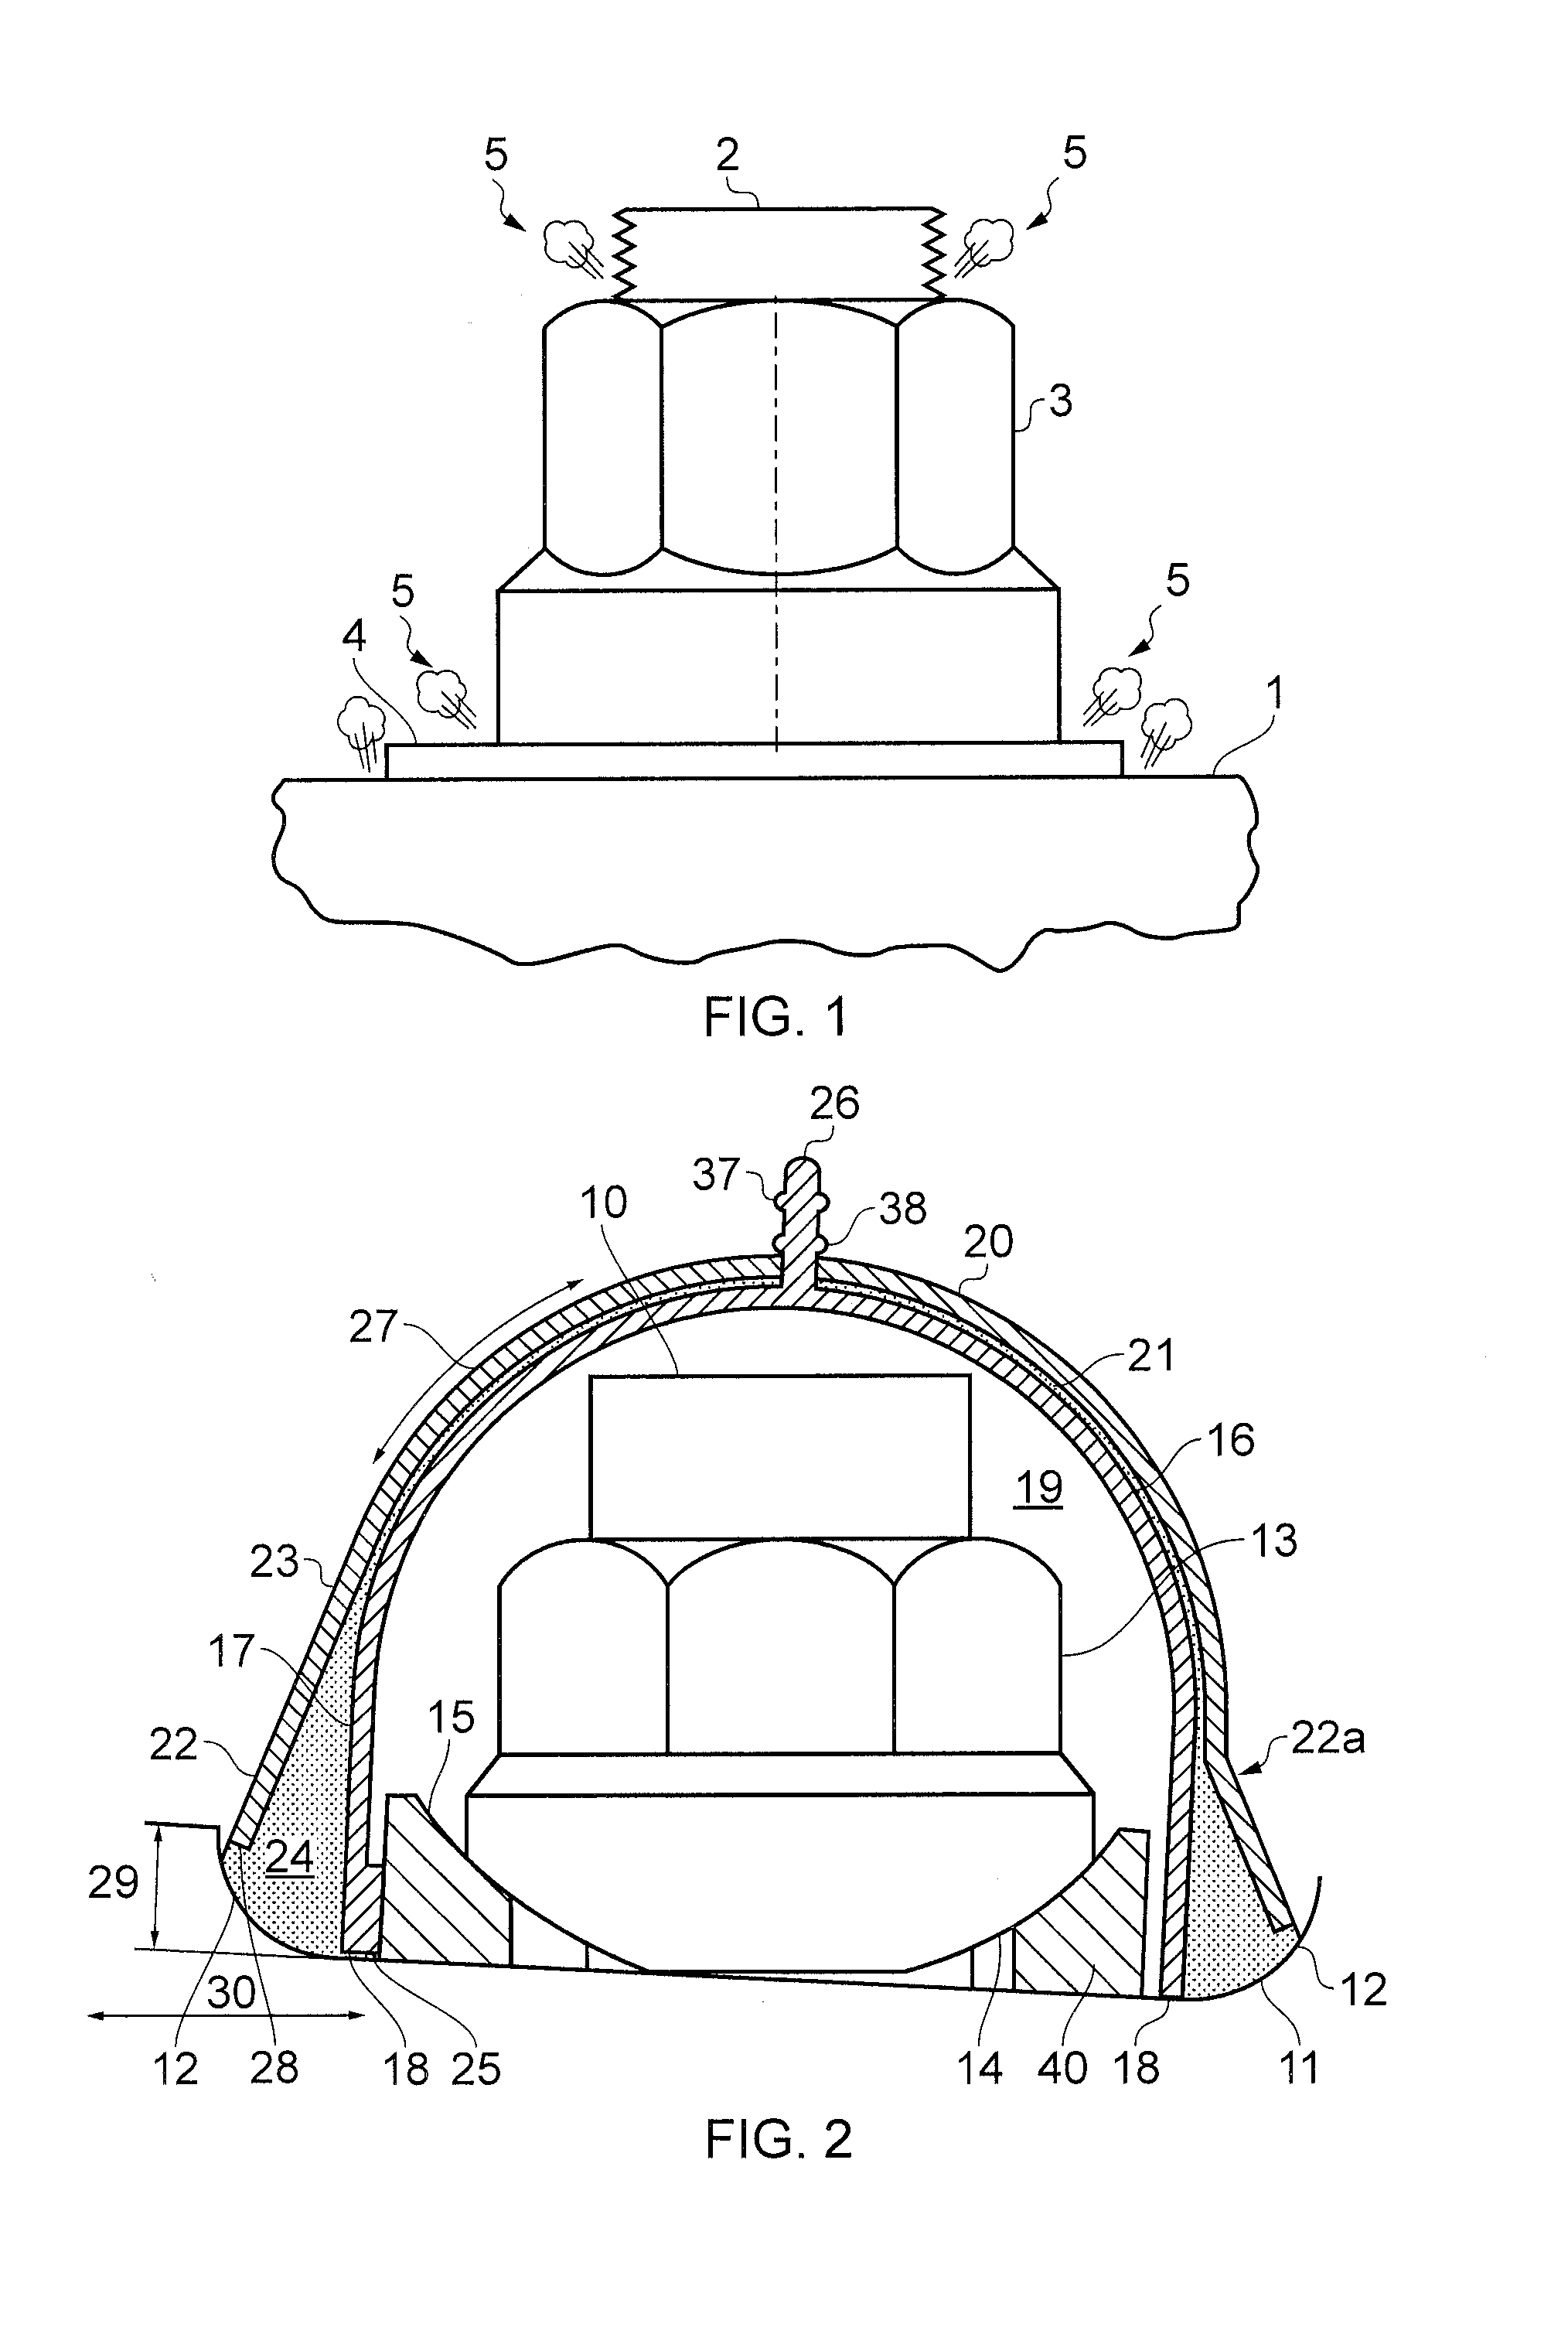 Cap for forming sealed cavity around fastener